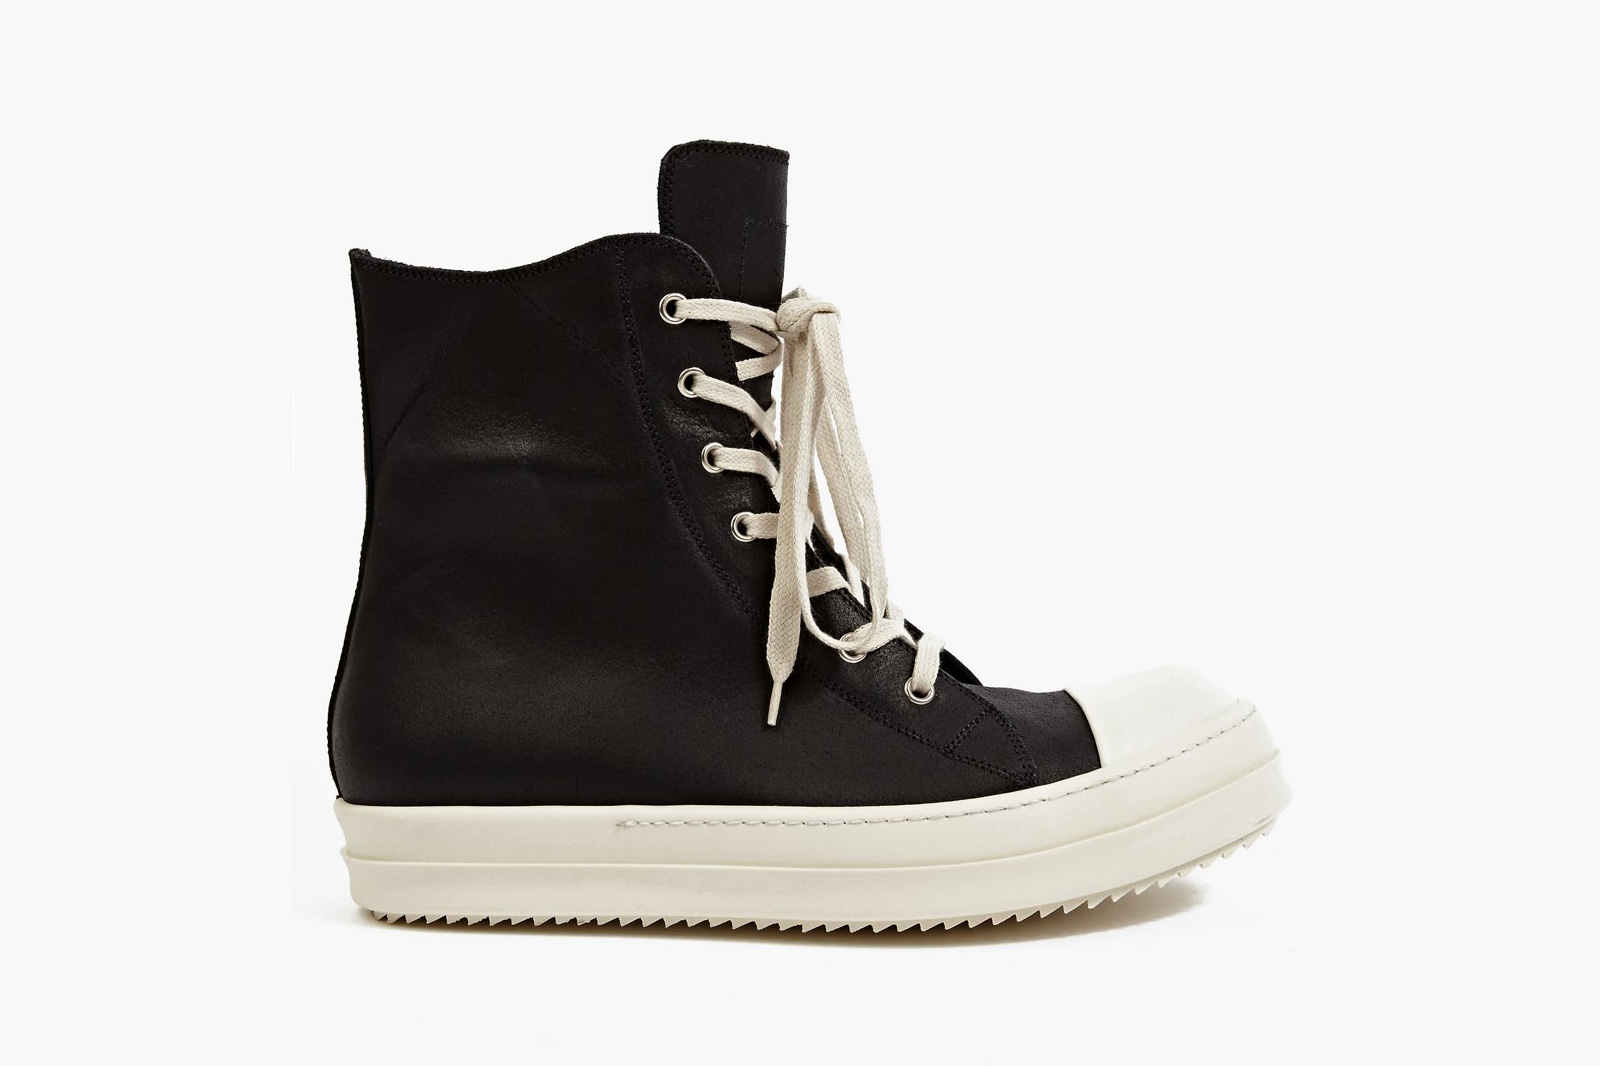 rick-owens-fall-winter-2014-sneaker-collection-01